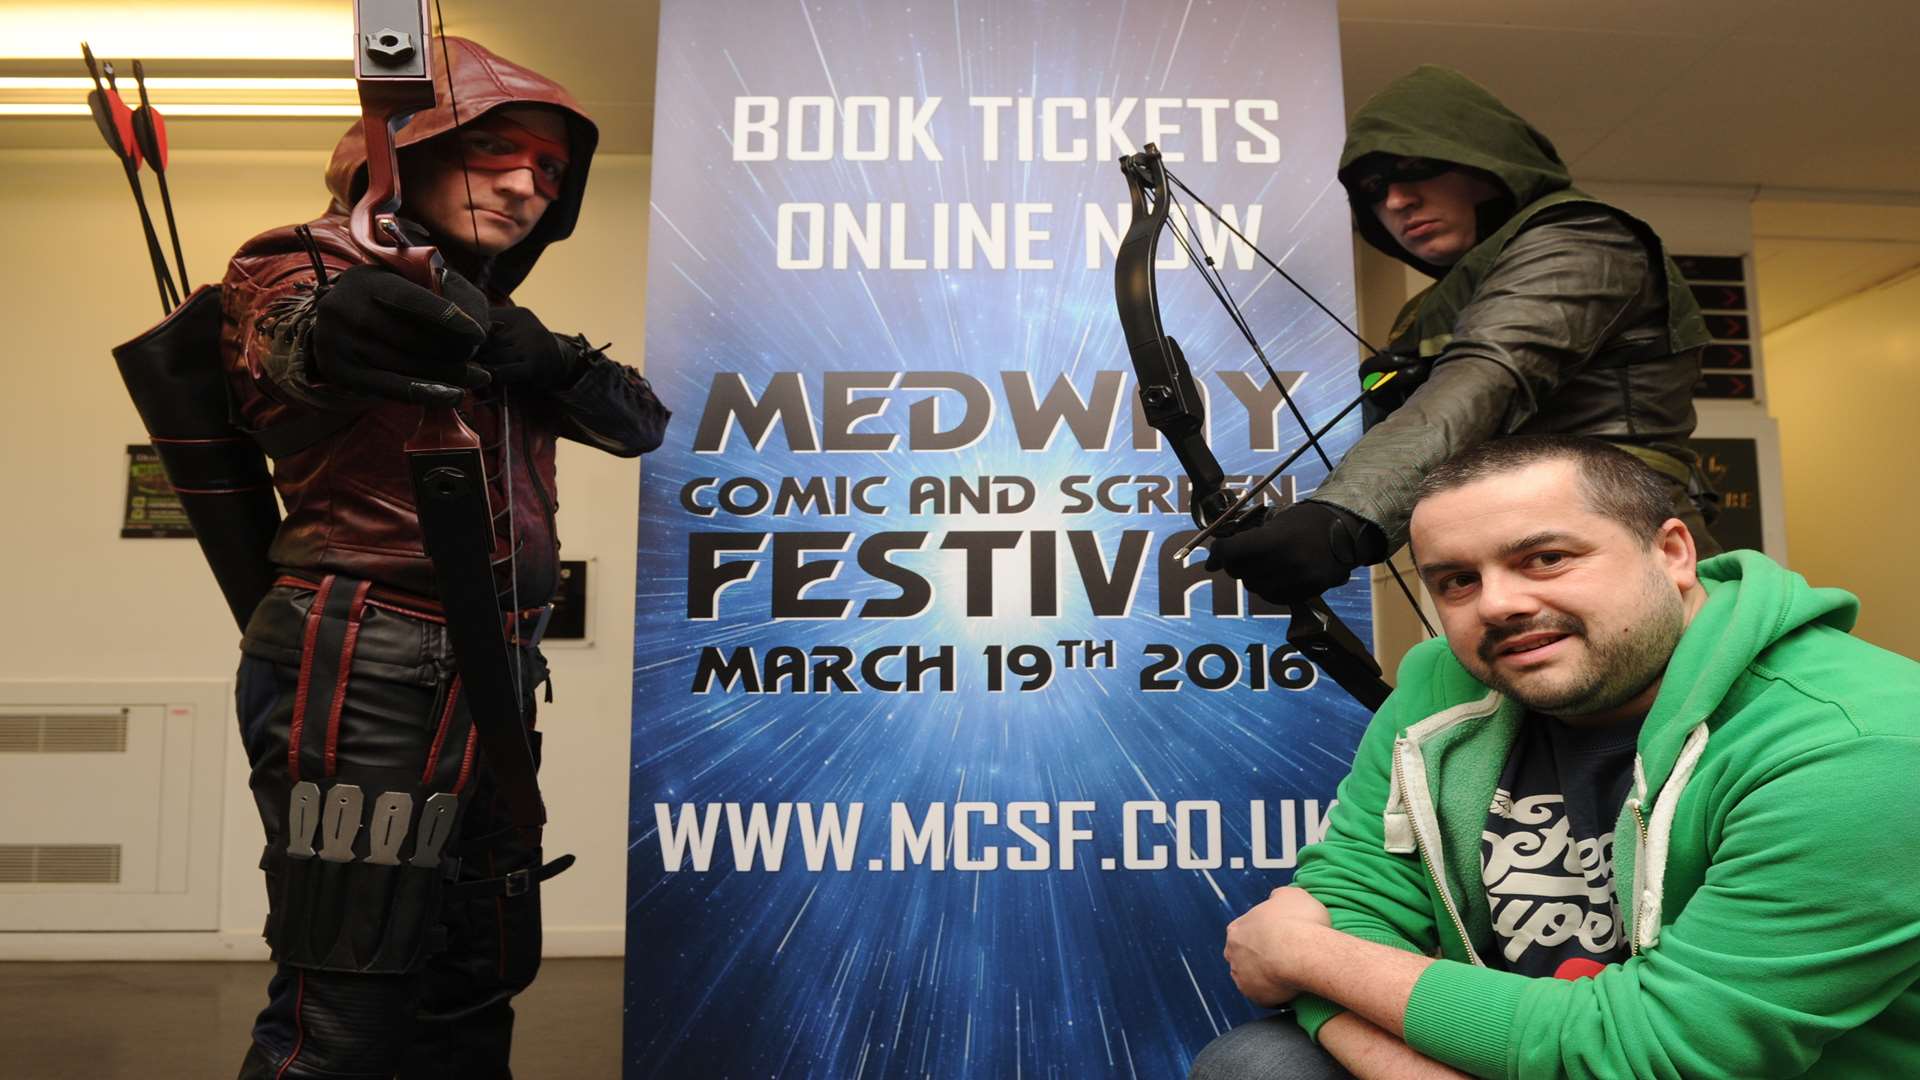 Organiser Adam Pace prepares for the first Medway Comic and Screen Festival